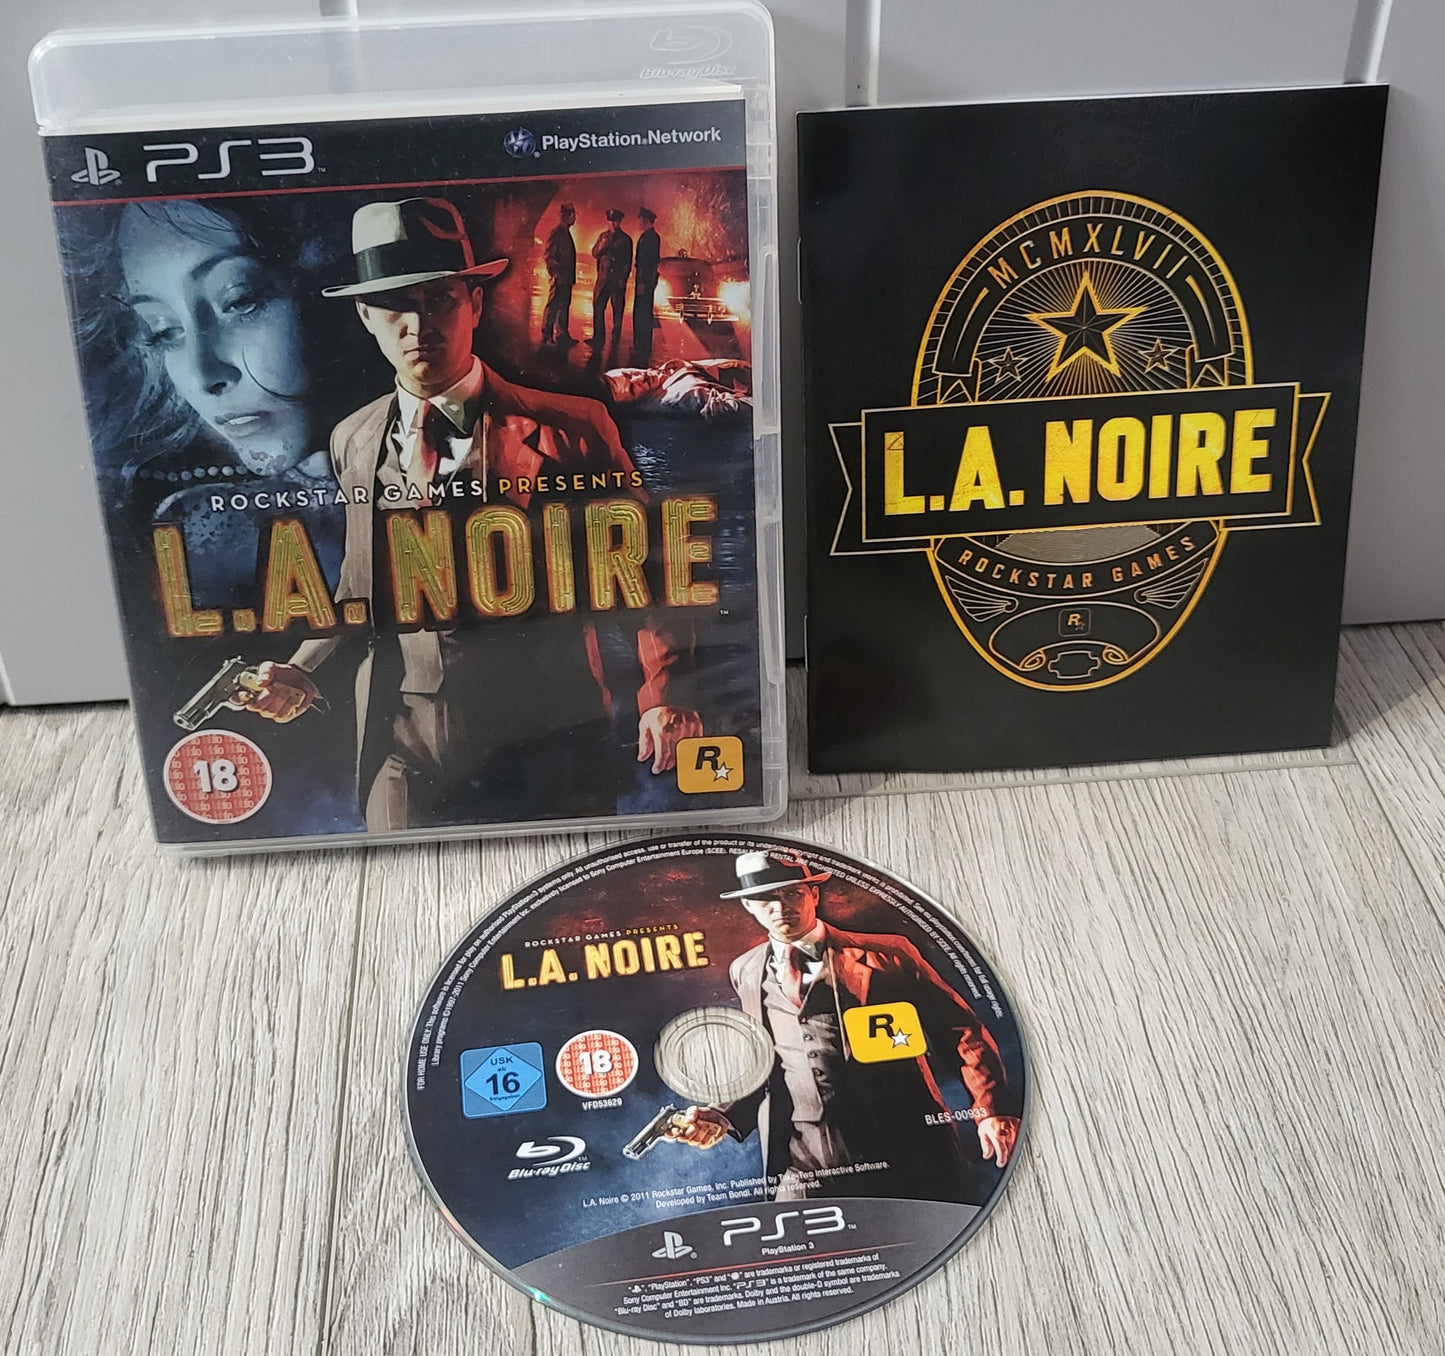 L.A. Noire Sony Playstation 3 (PS3) Game